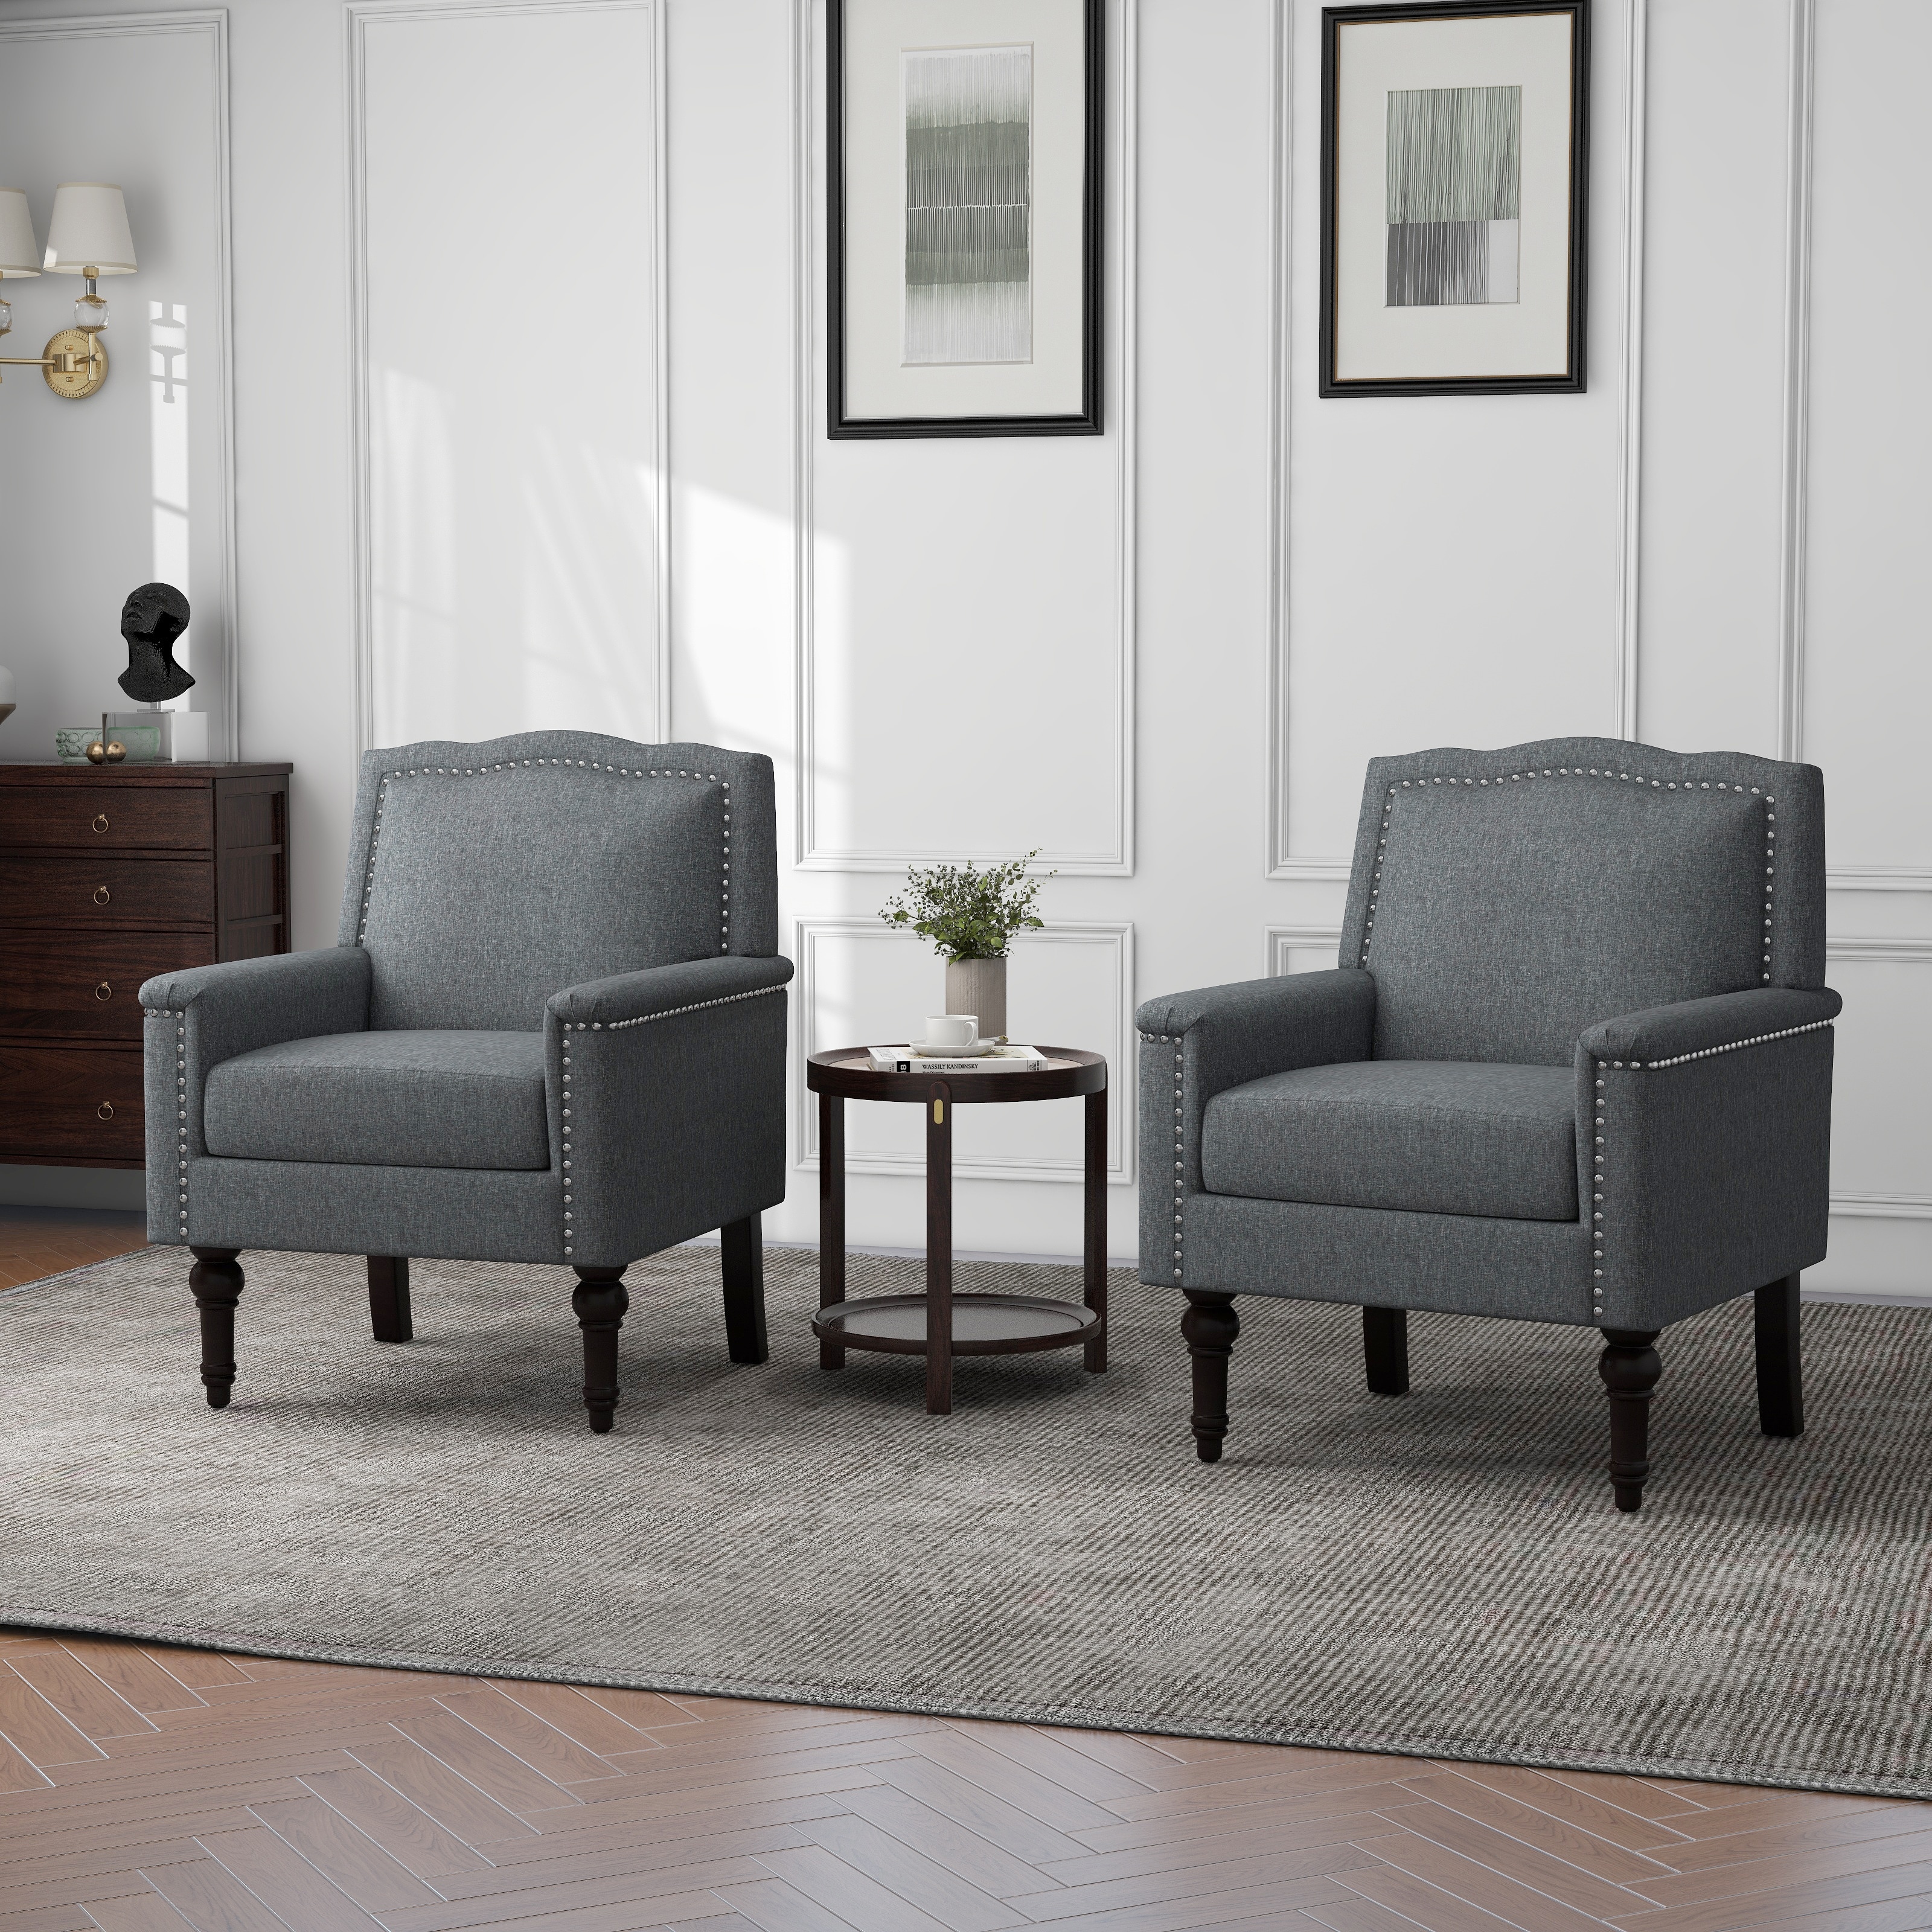 2 PACK Contemporary Accent Armchair with Nailheads Living Room Furniture